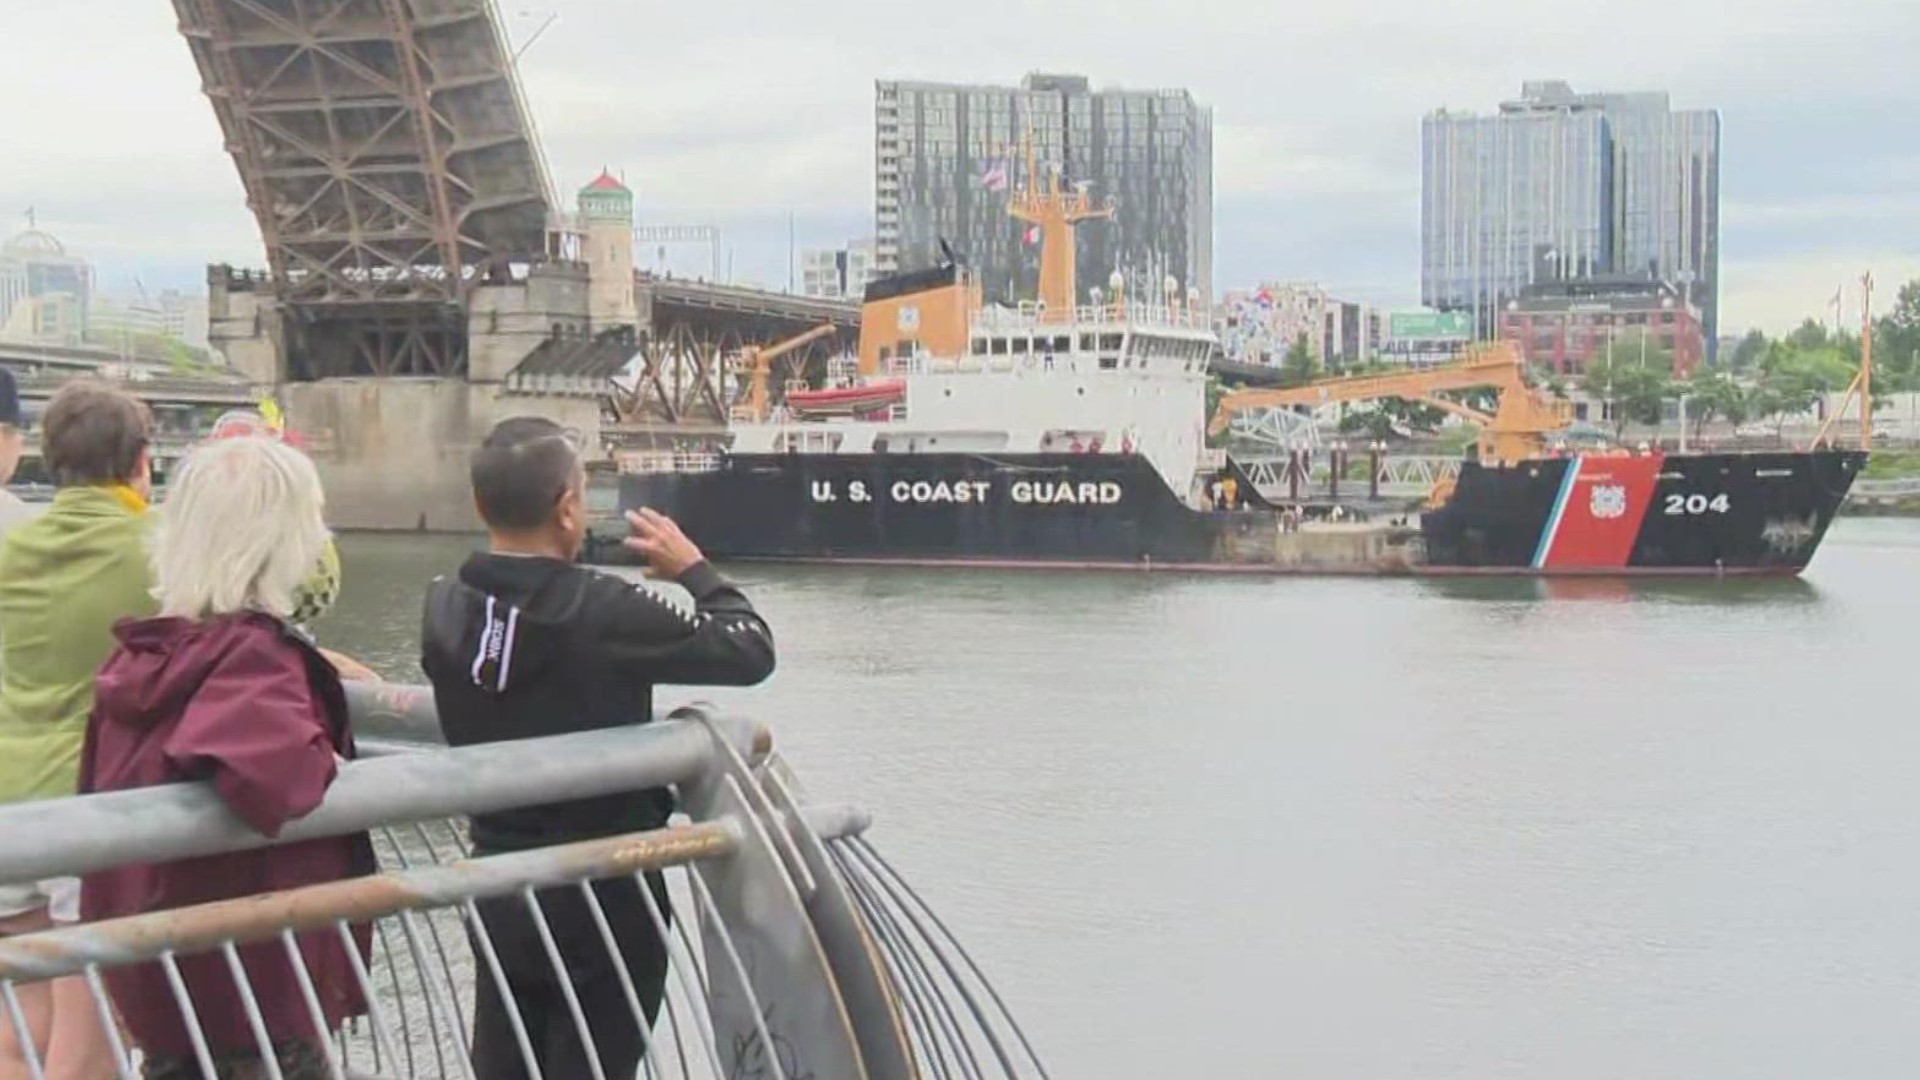 Local vendors count on the annual event for an economic boost. But for the past two years, Fleet Week has had to go virtual due to the pandemic.